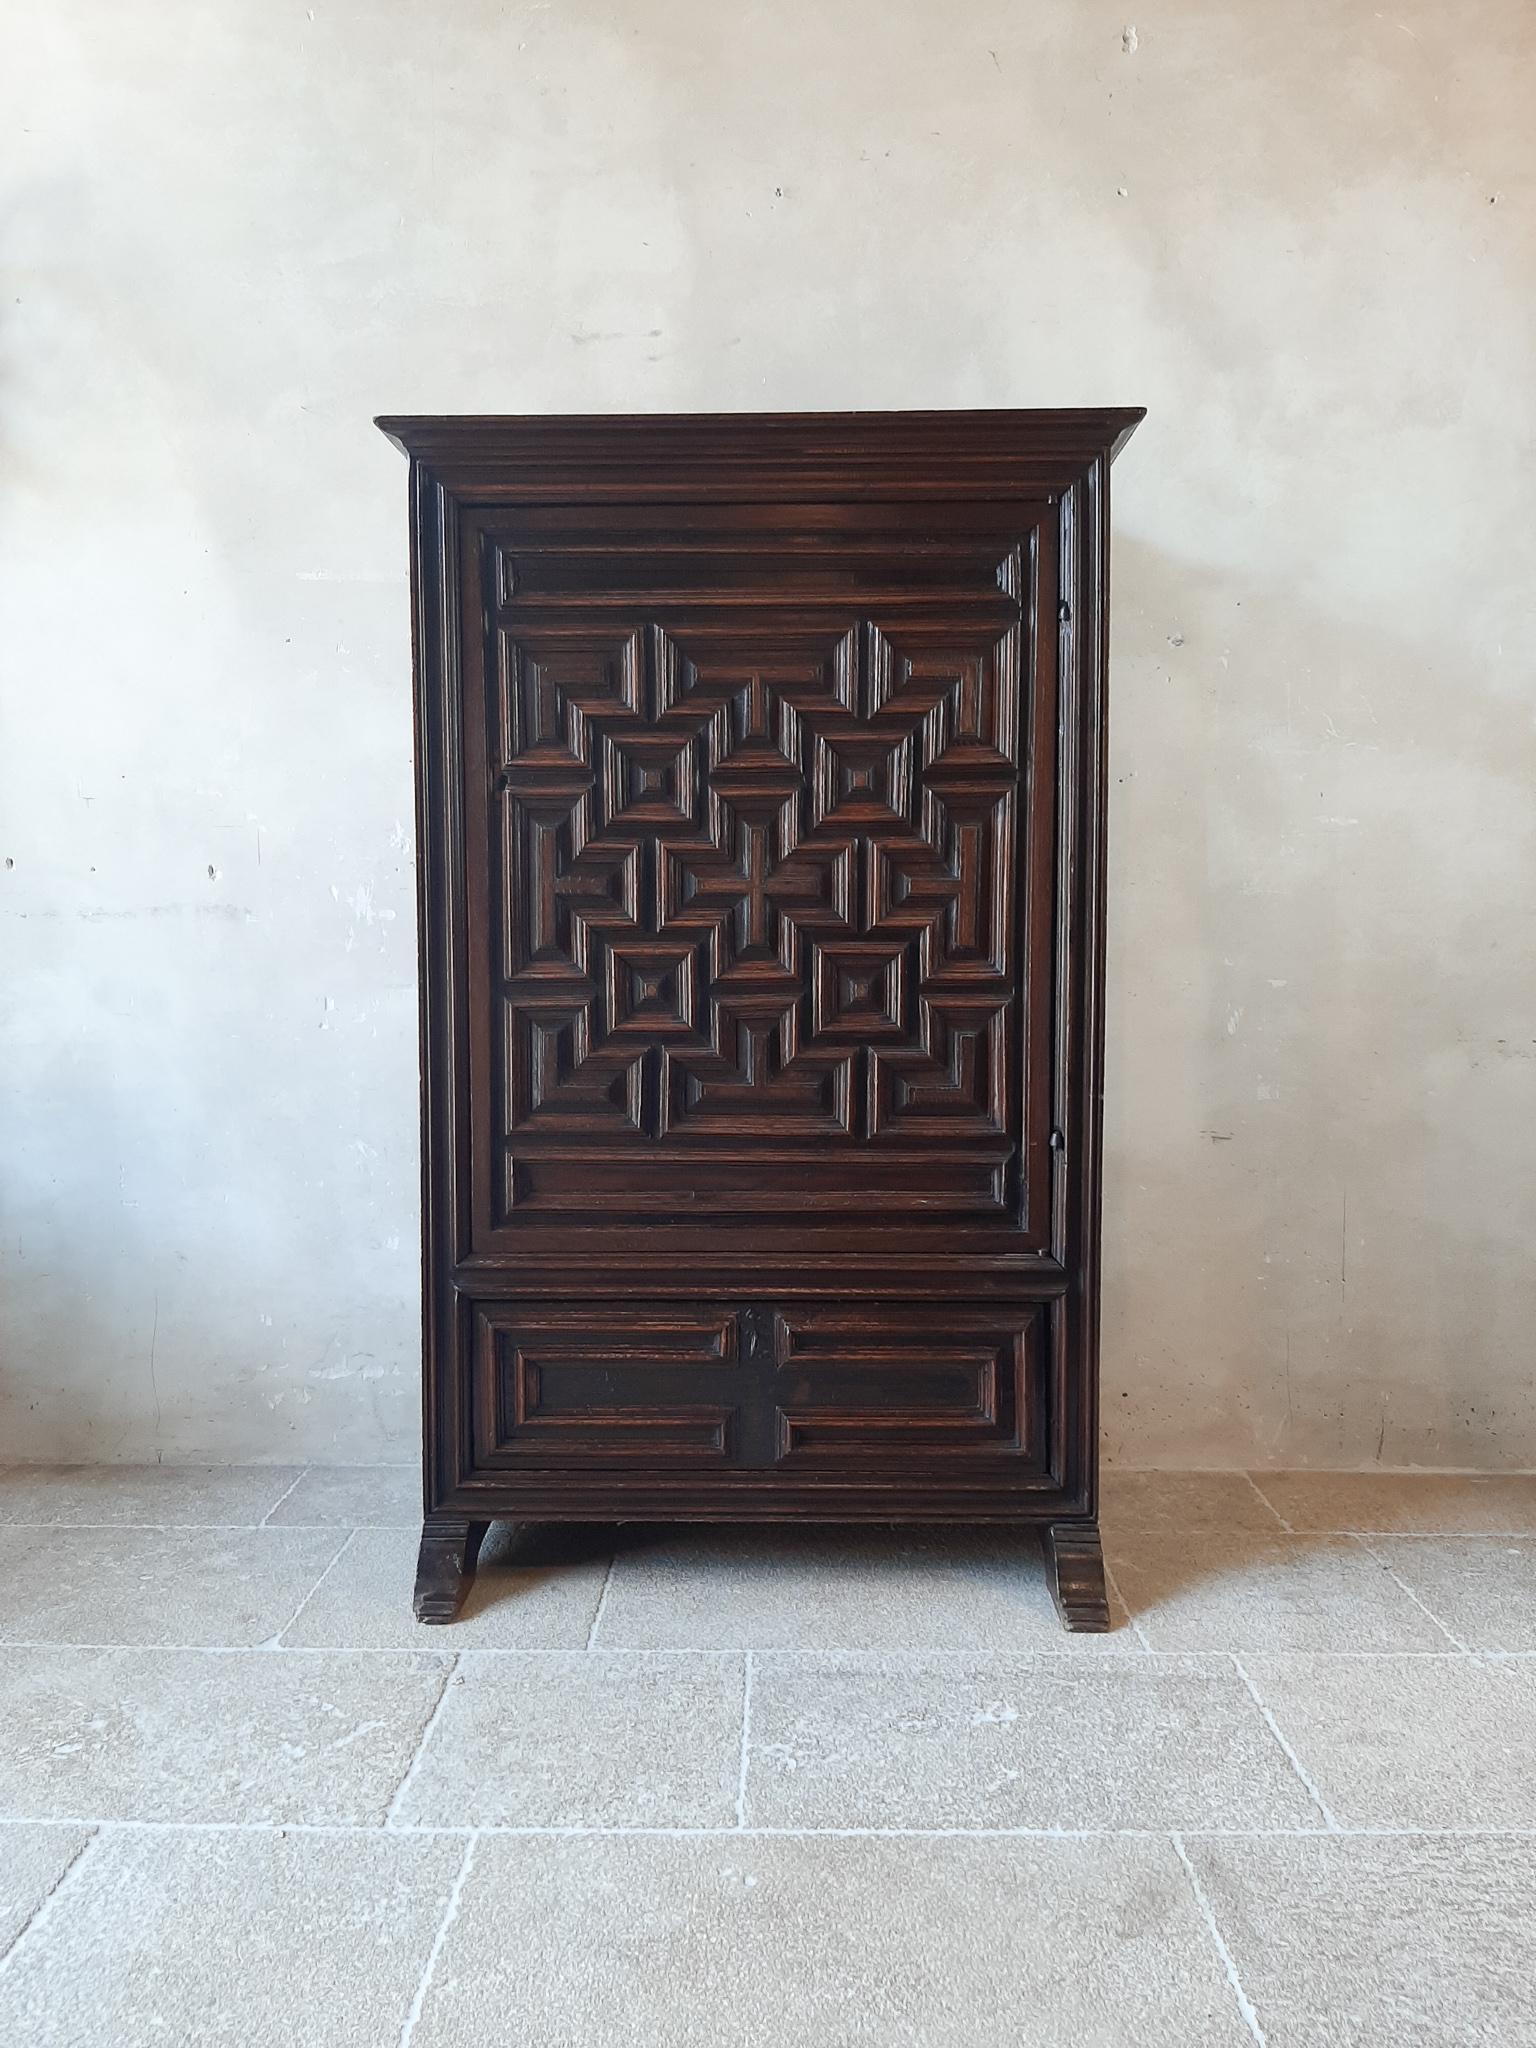 Antique 17th century Spanish armario or wardrobe armoire constructed from walnut and pine. It was made in Spain, 1650-1670, and it is a Baroque cupboard. The top and back of the chest were added later due to restorement in the 1970s.
It is a very